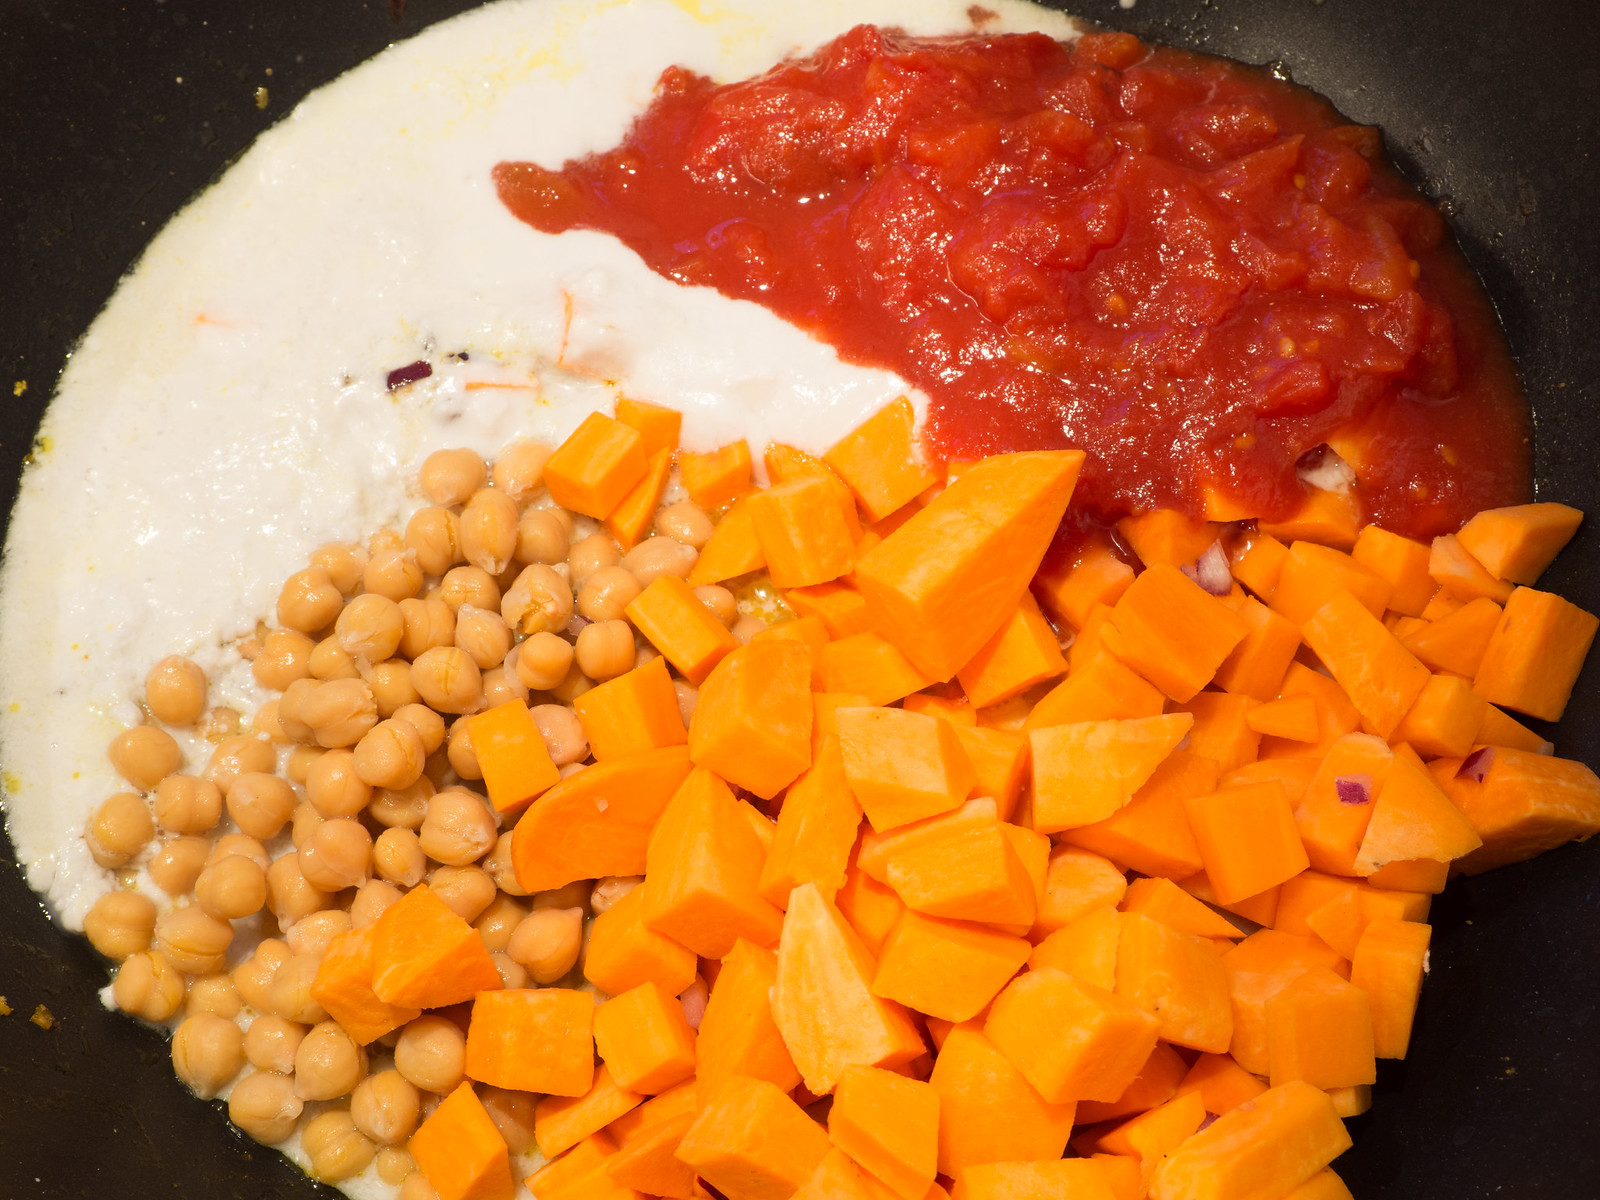 Recipe for Homemade Sweet Potato, Spinach, Chickpea and Coconut Curry